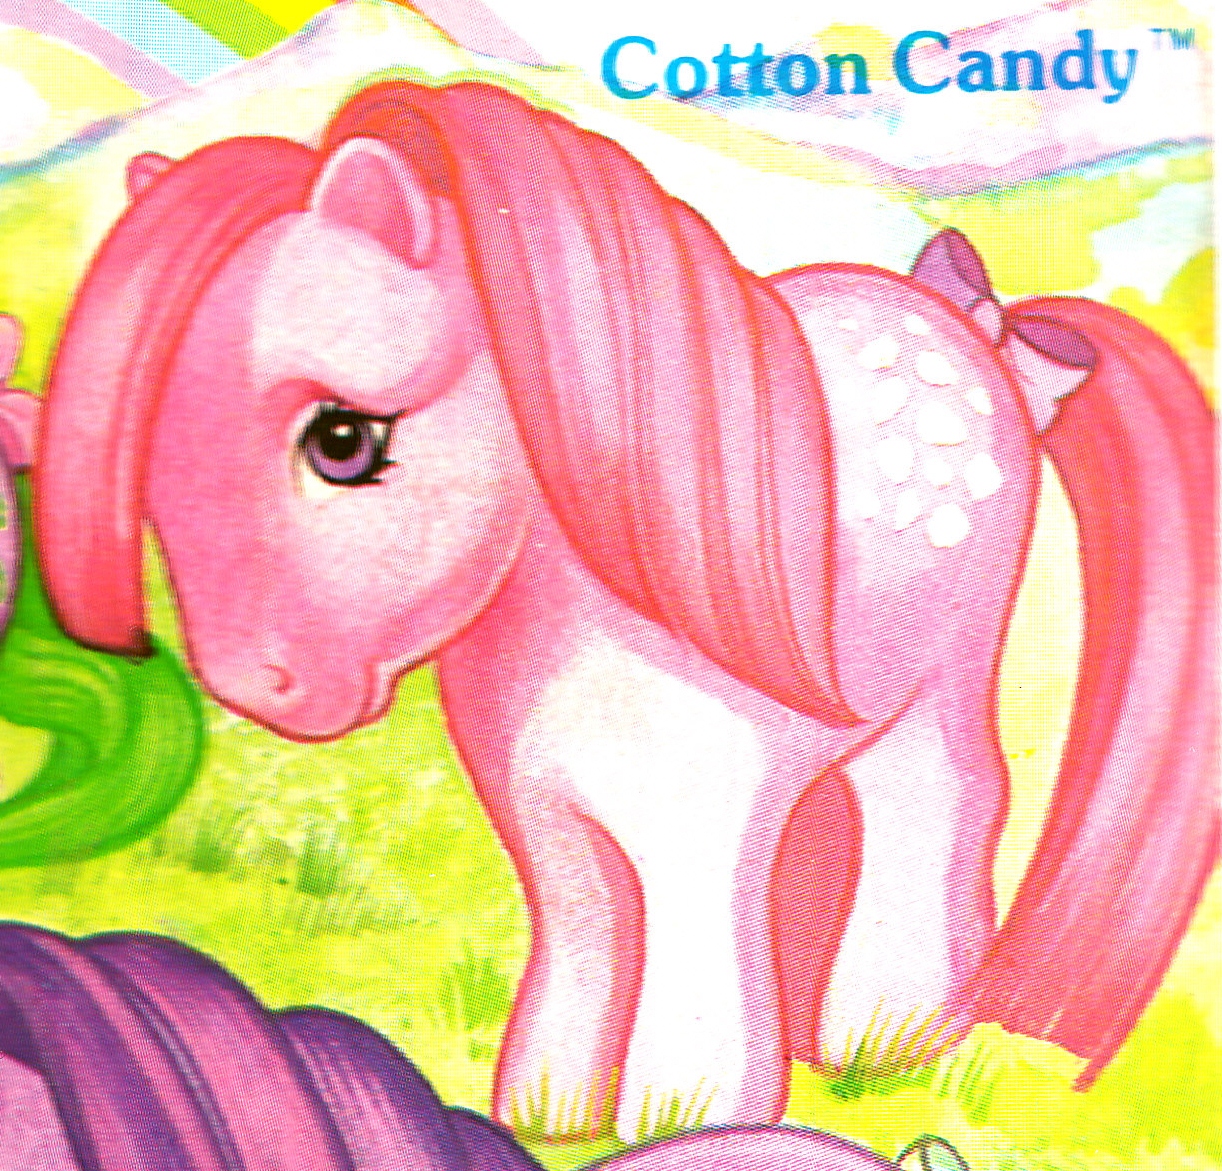 thumb]Cotton Candy, from her backcard